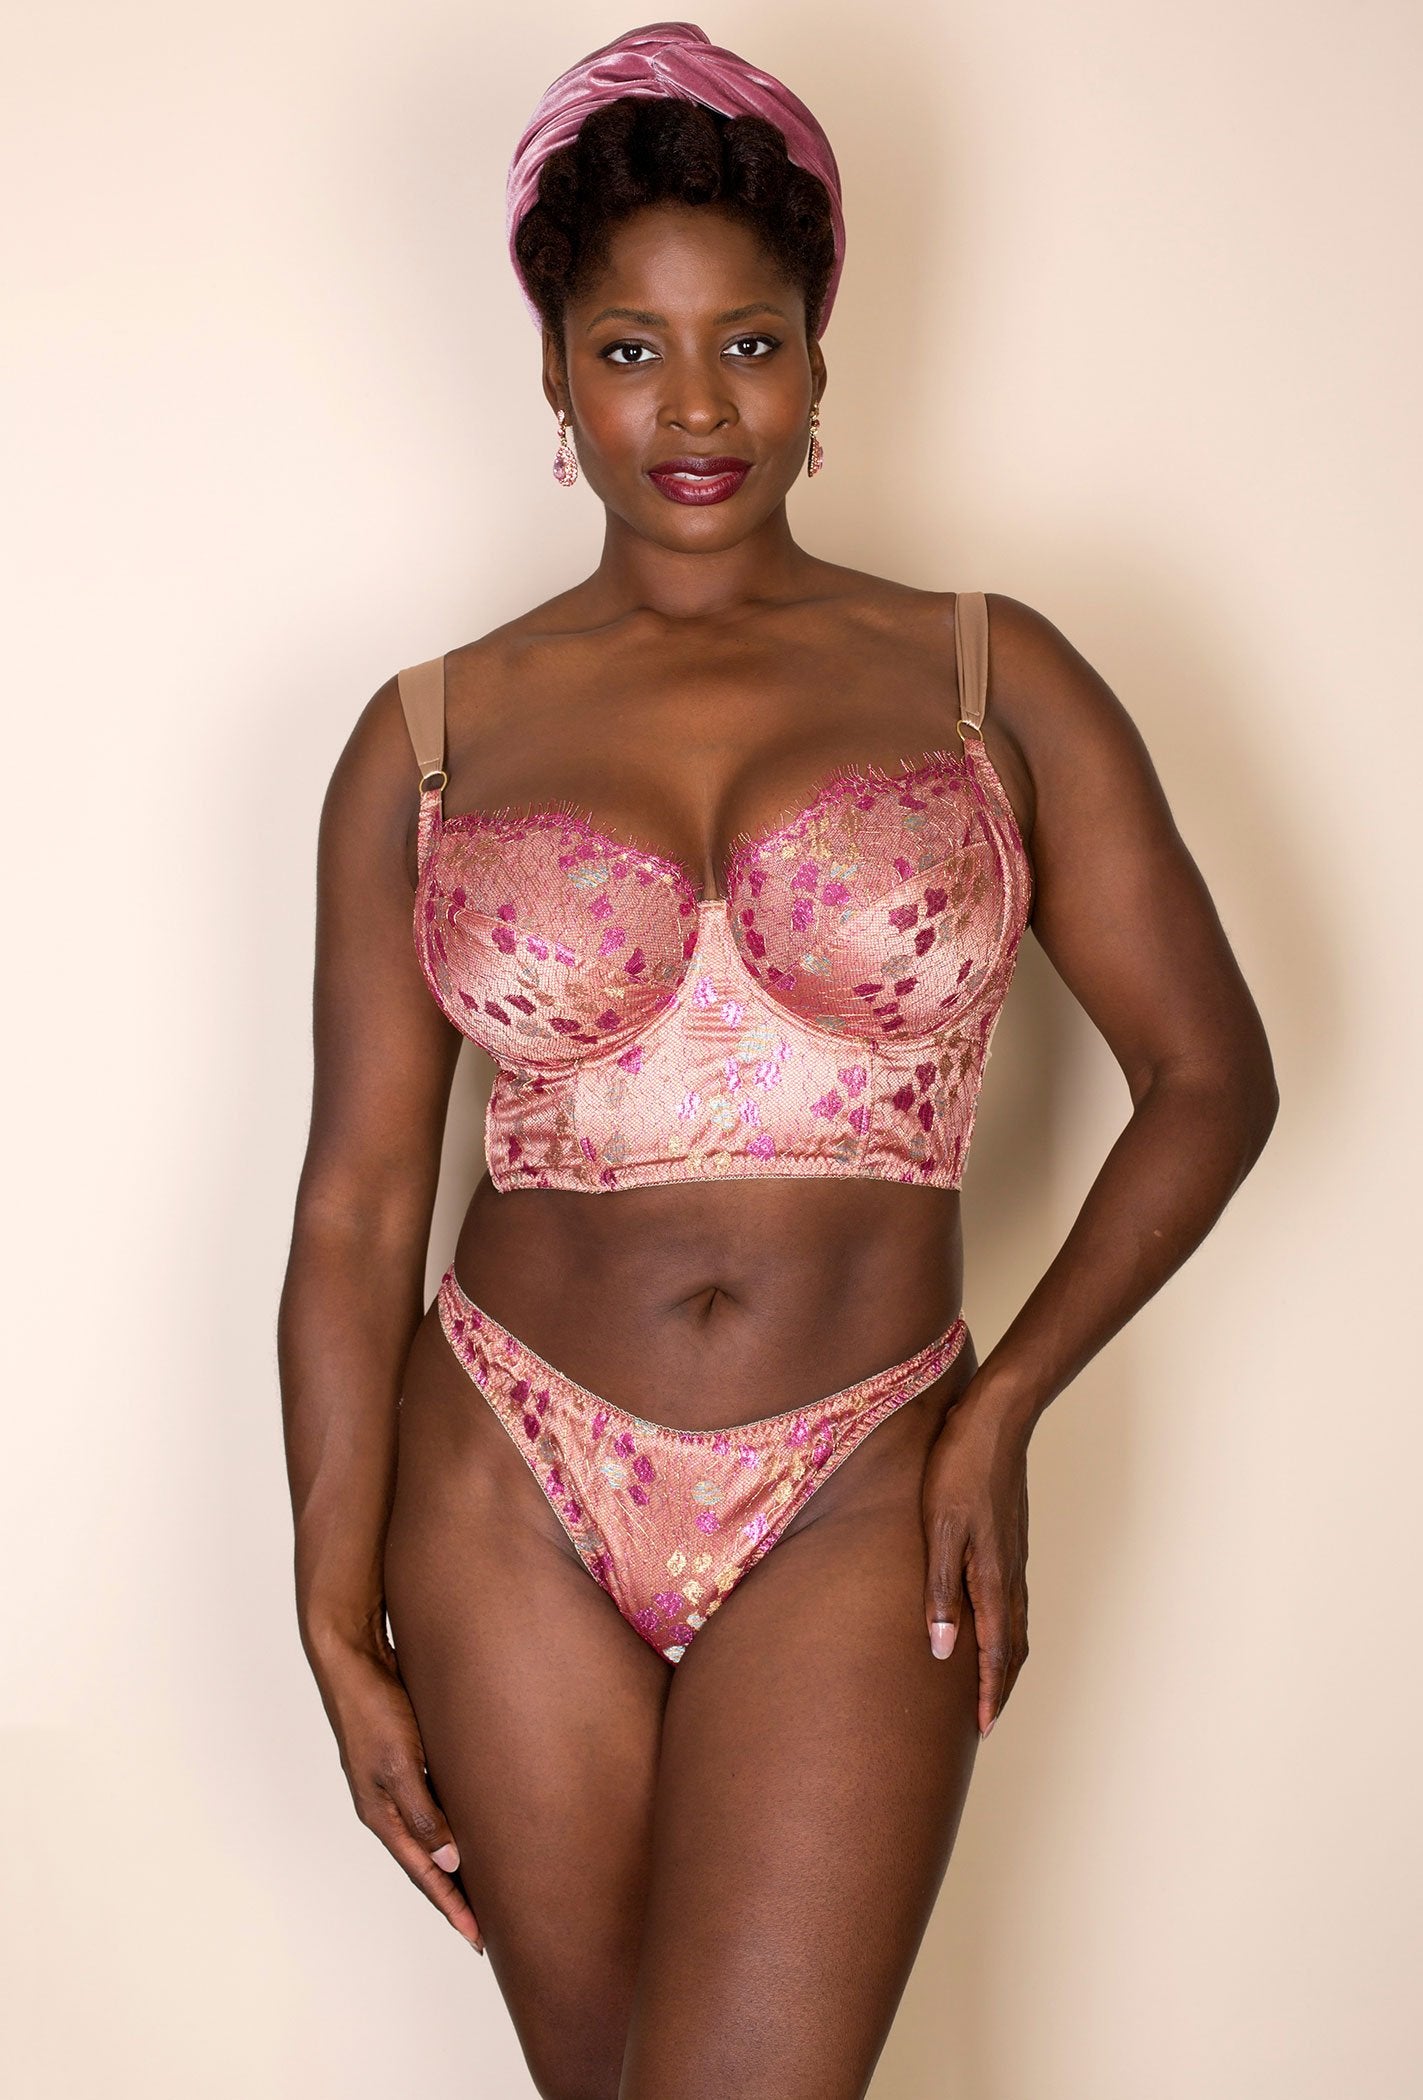 G Cup Bras and Lingerie, G Cup Bra Size